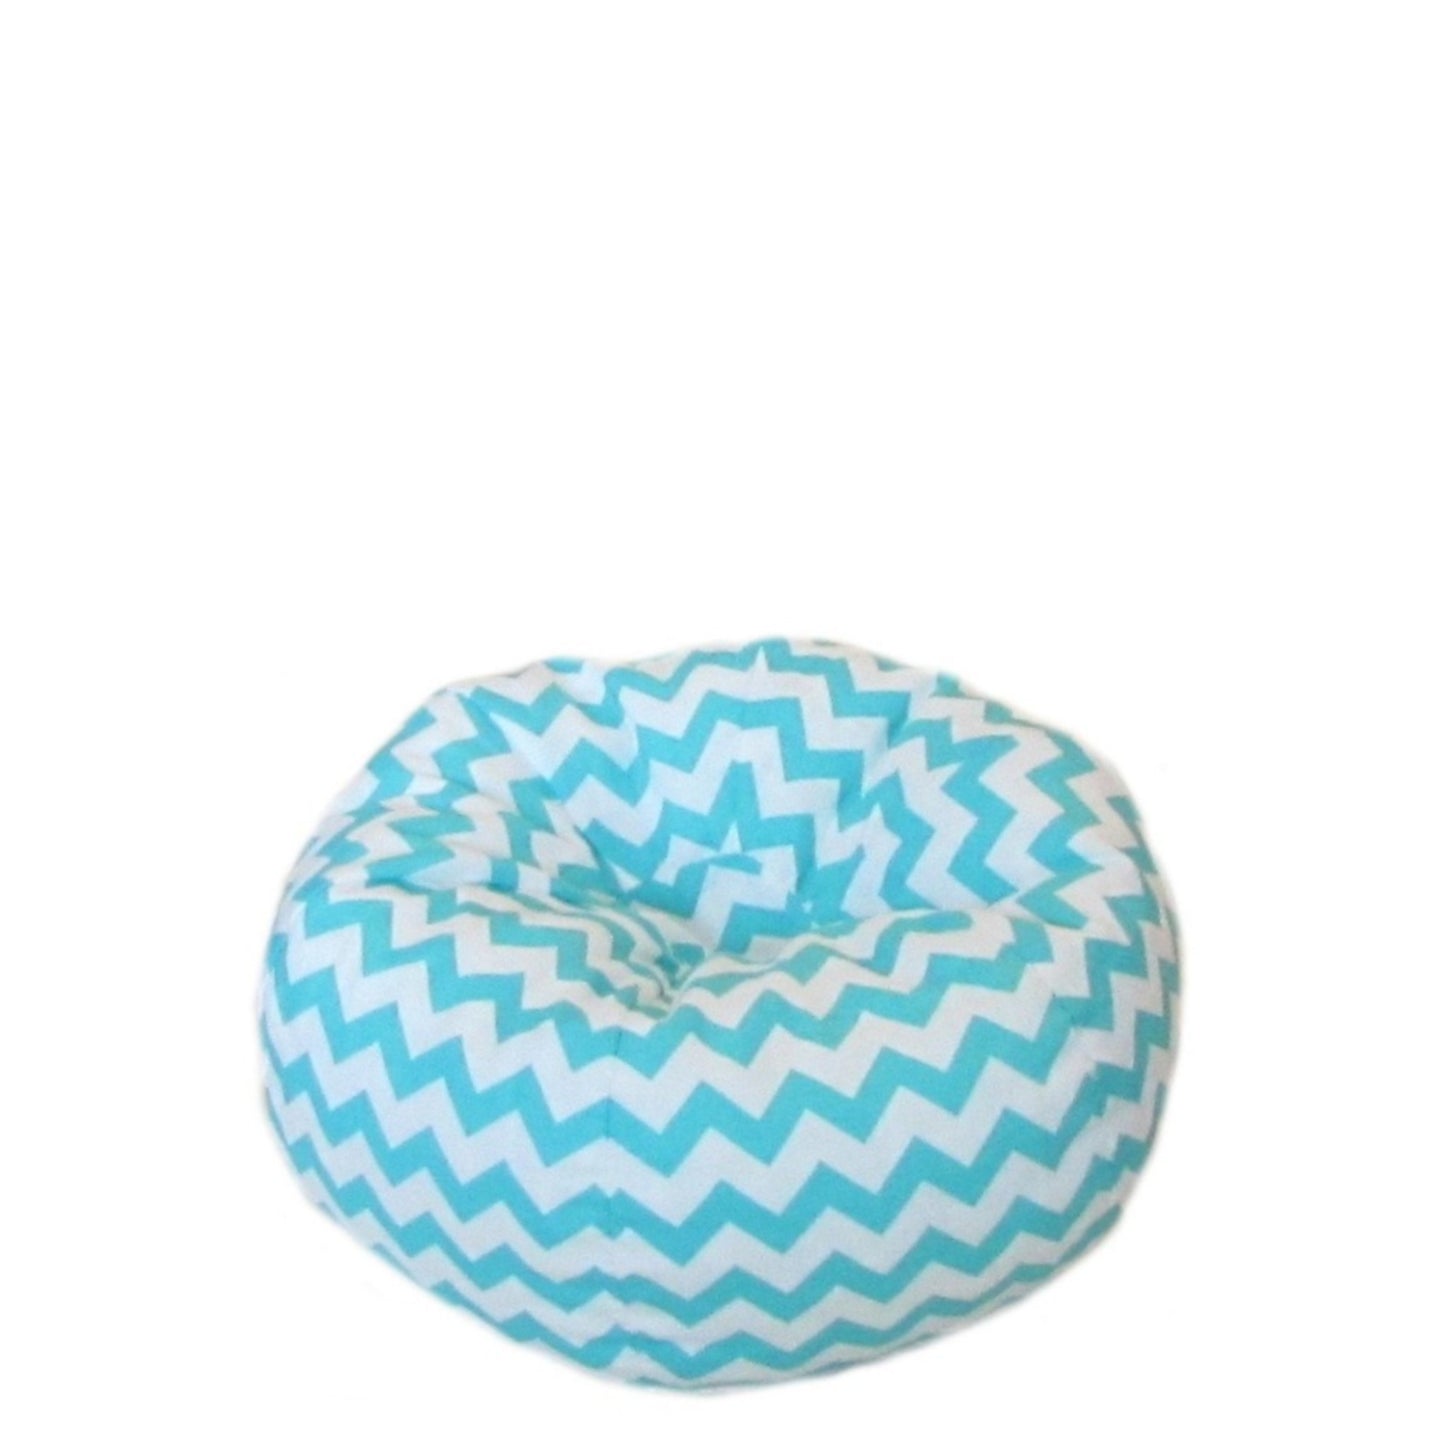 Turquoise Doll Bean Bag Chair for 18-inch dolls without doll